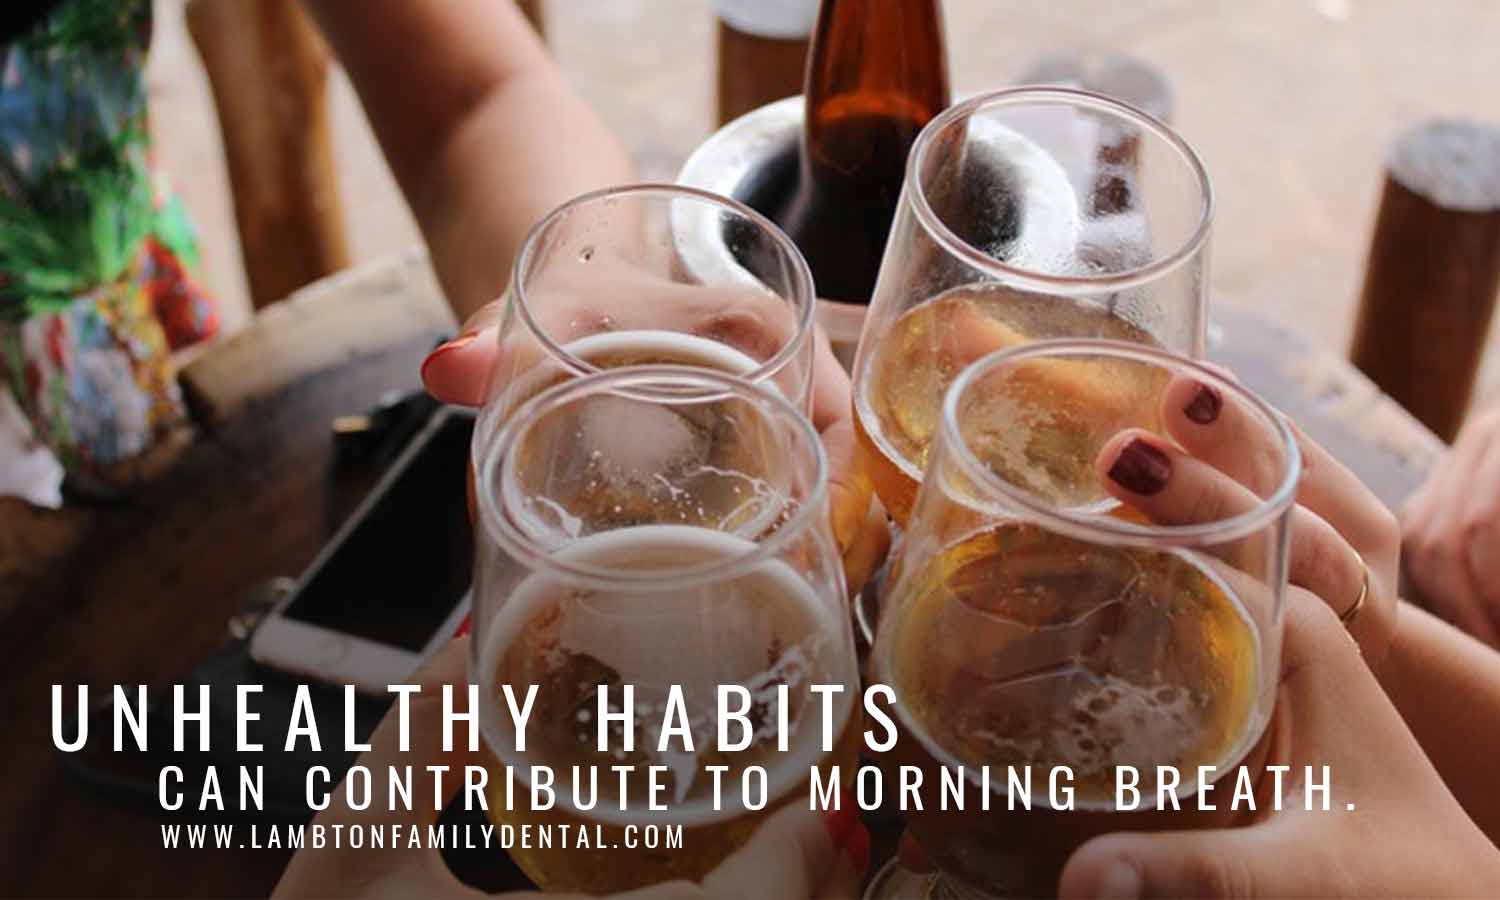 Unhealthy habits can contribute to morning breath